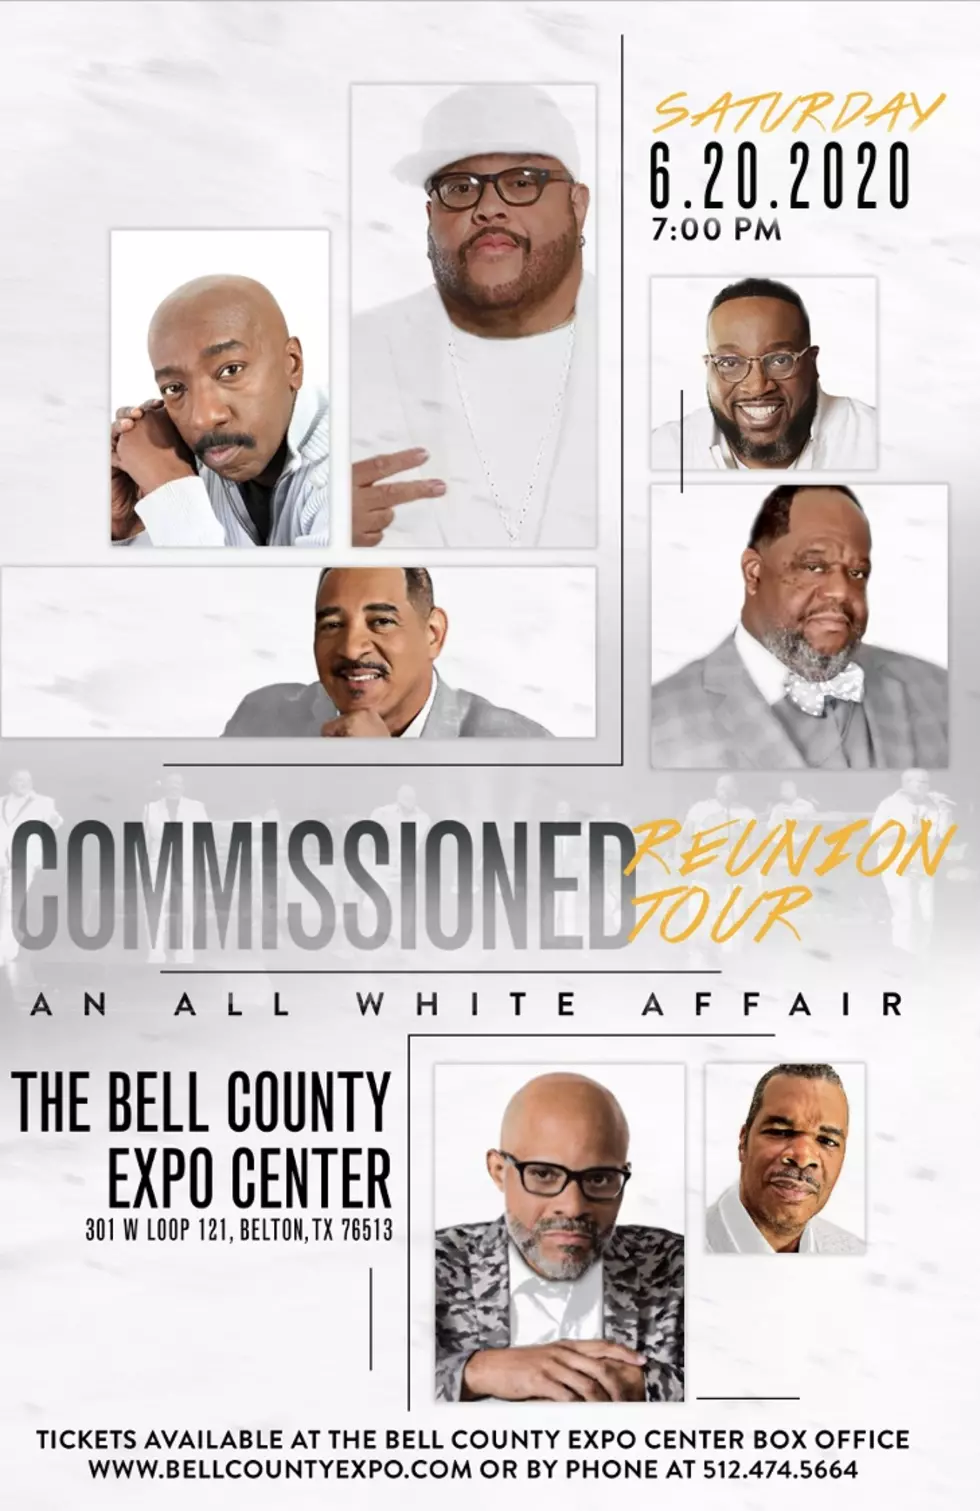 Commissioned Reunion Concert In Belton Rescheduled To June 20th